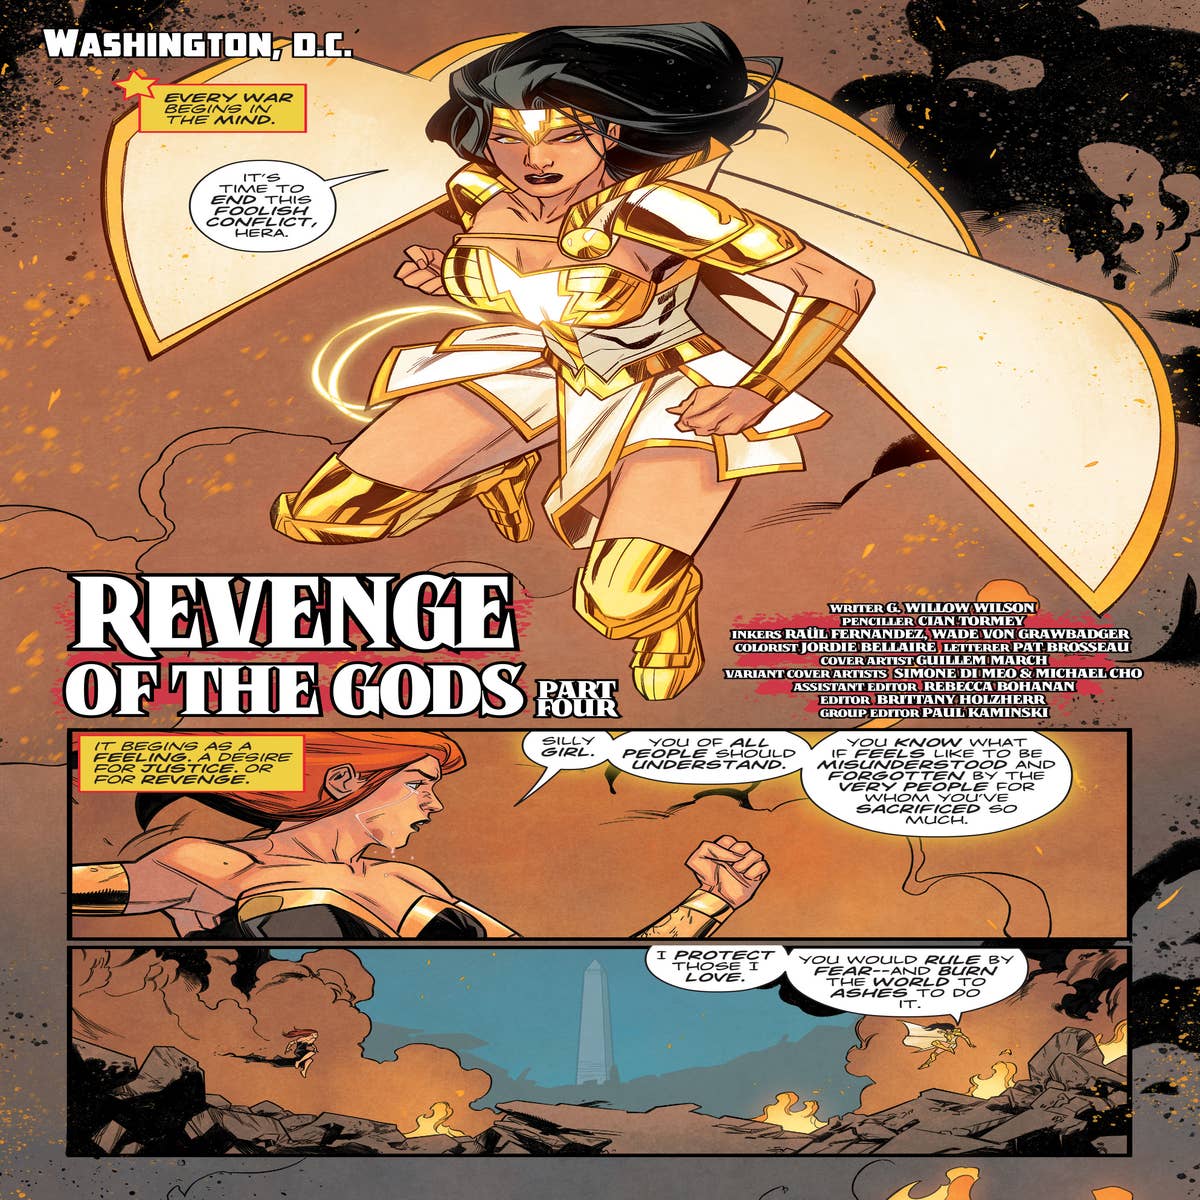 A team-up of godly proportions: How Revenge of the Gods brought Wonder Woman  and Shazam together